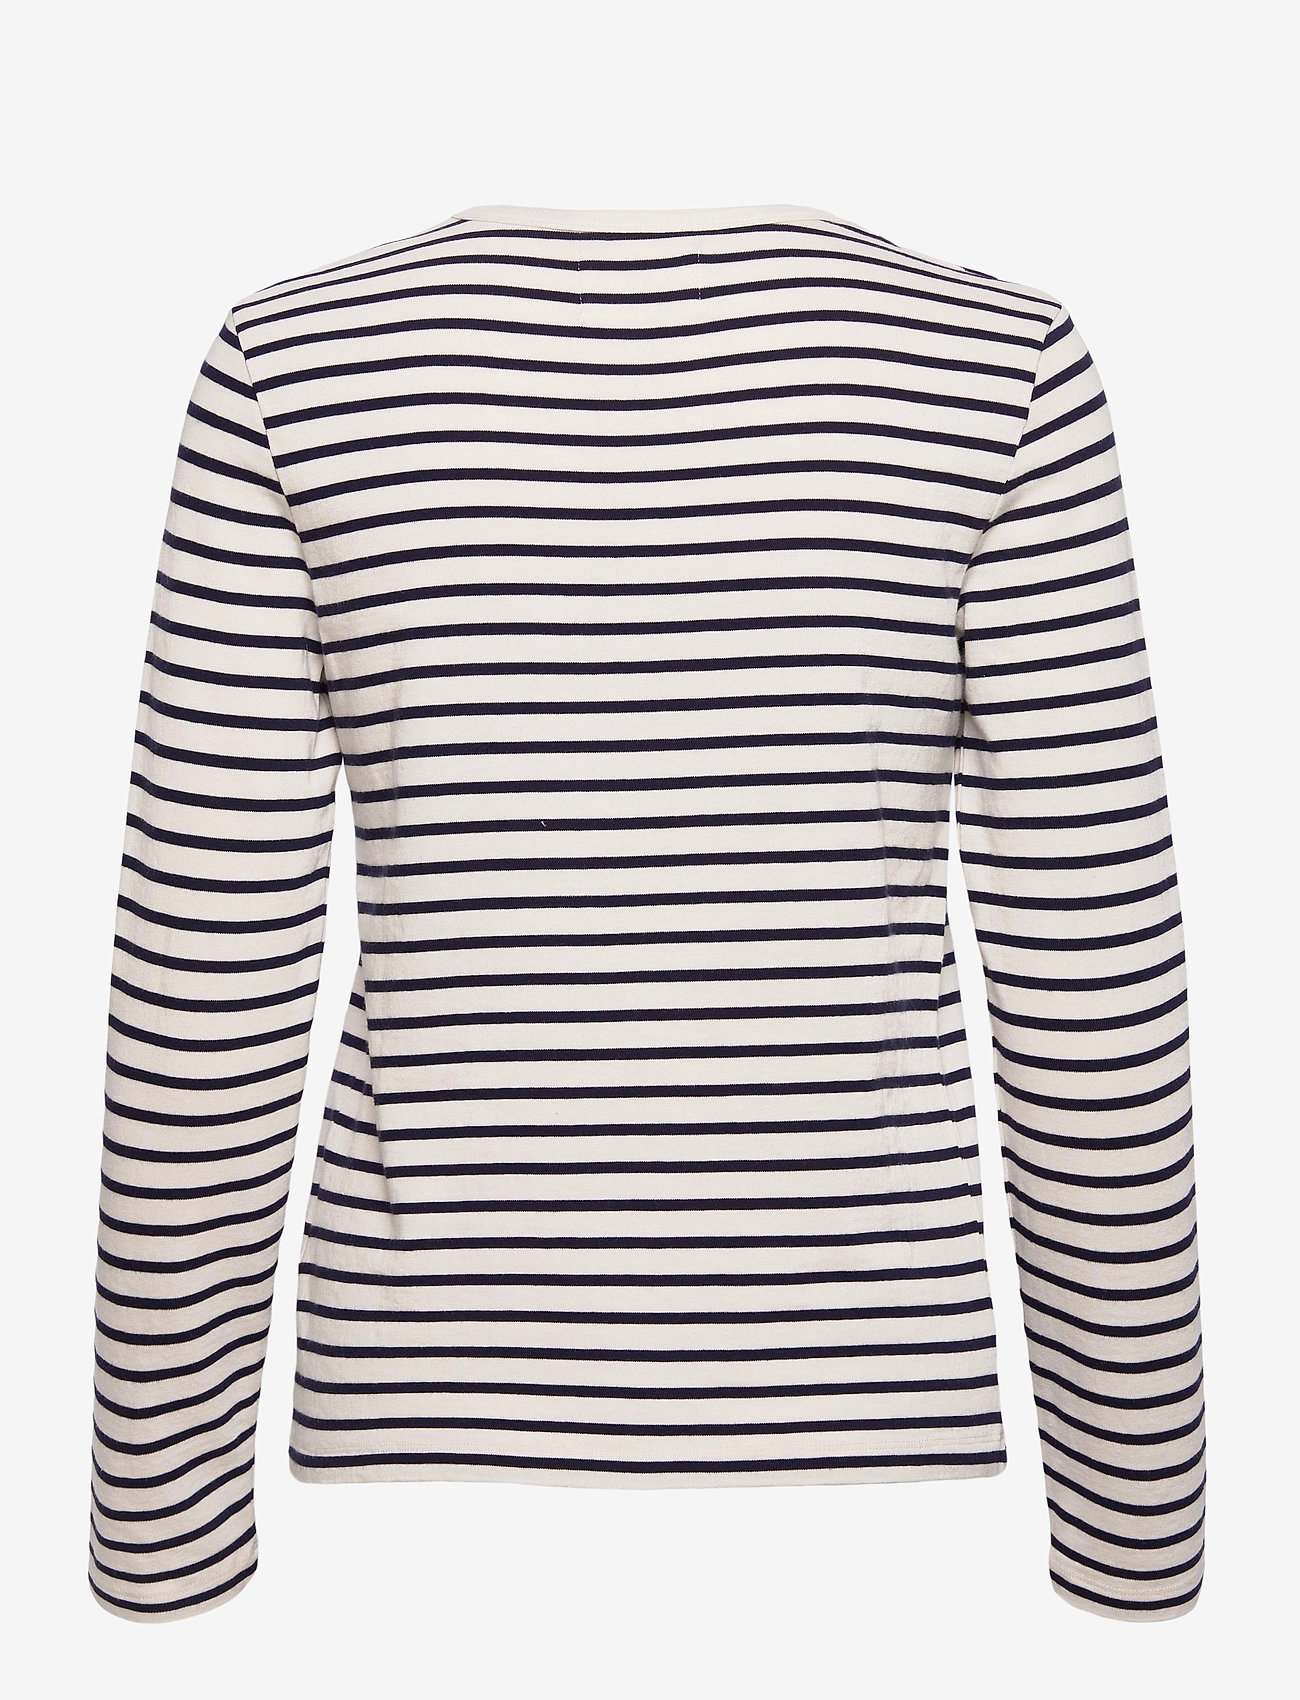 Double A by Wood Wood - Moa stripe long sleeve - t-shirt & tops - off-white/navy stripes - 1